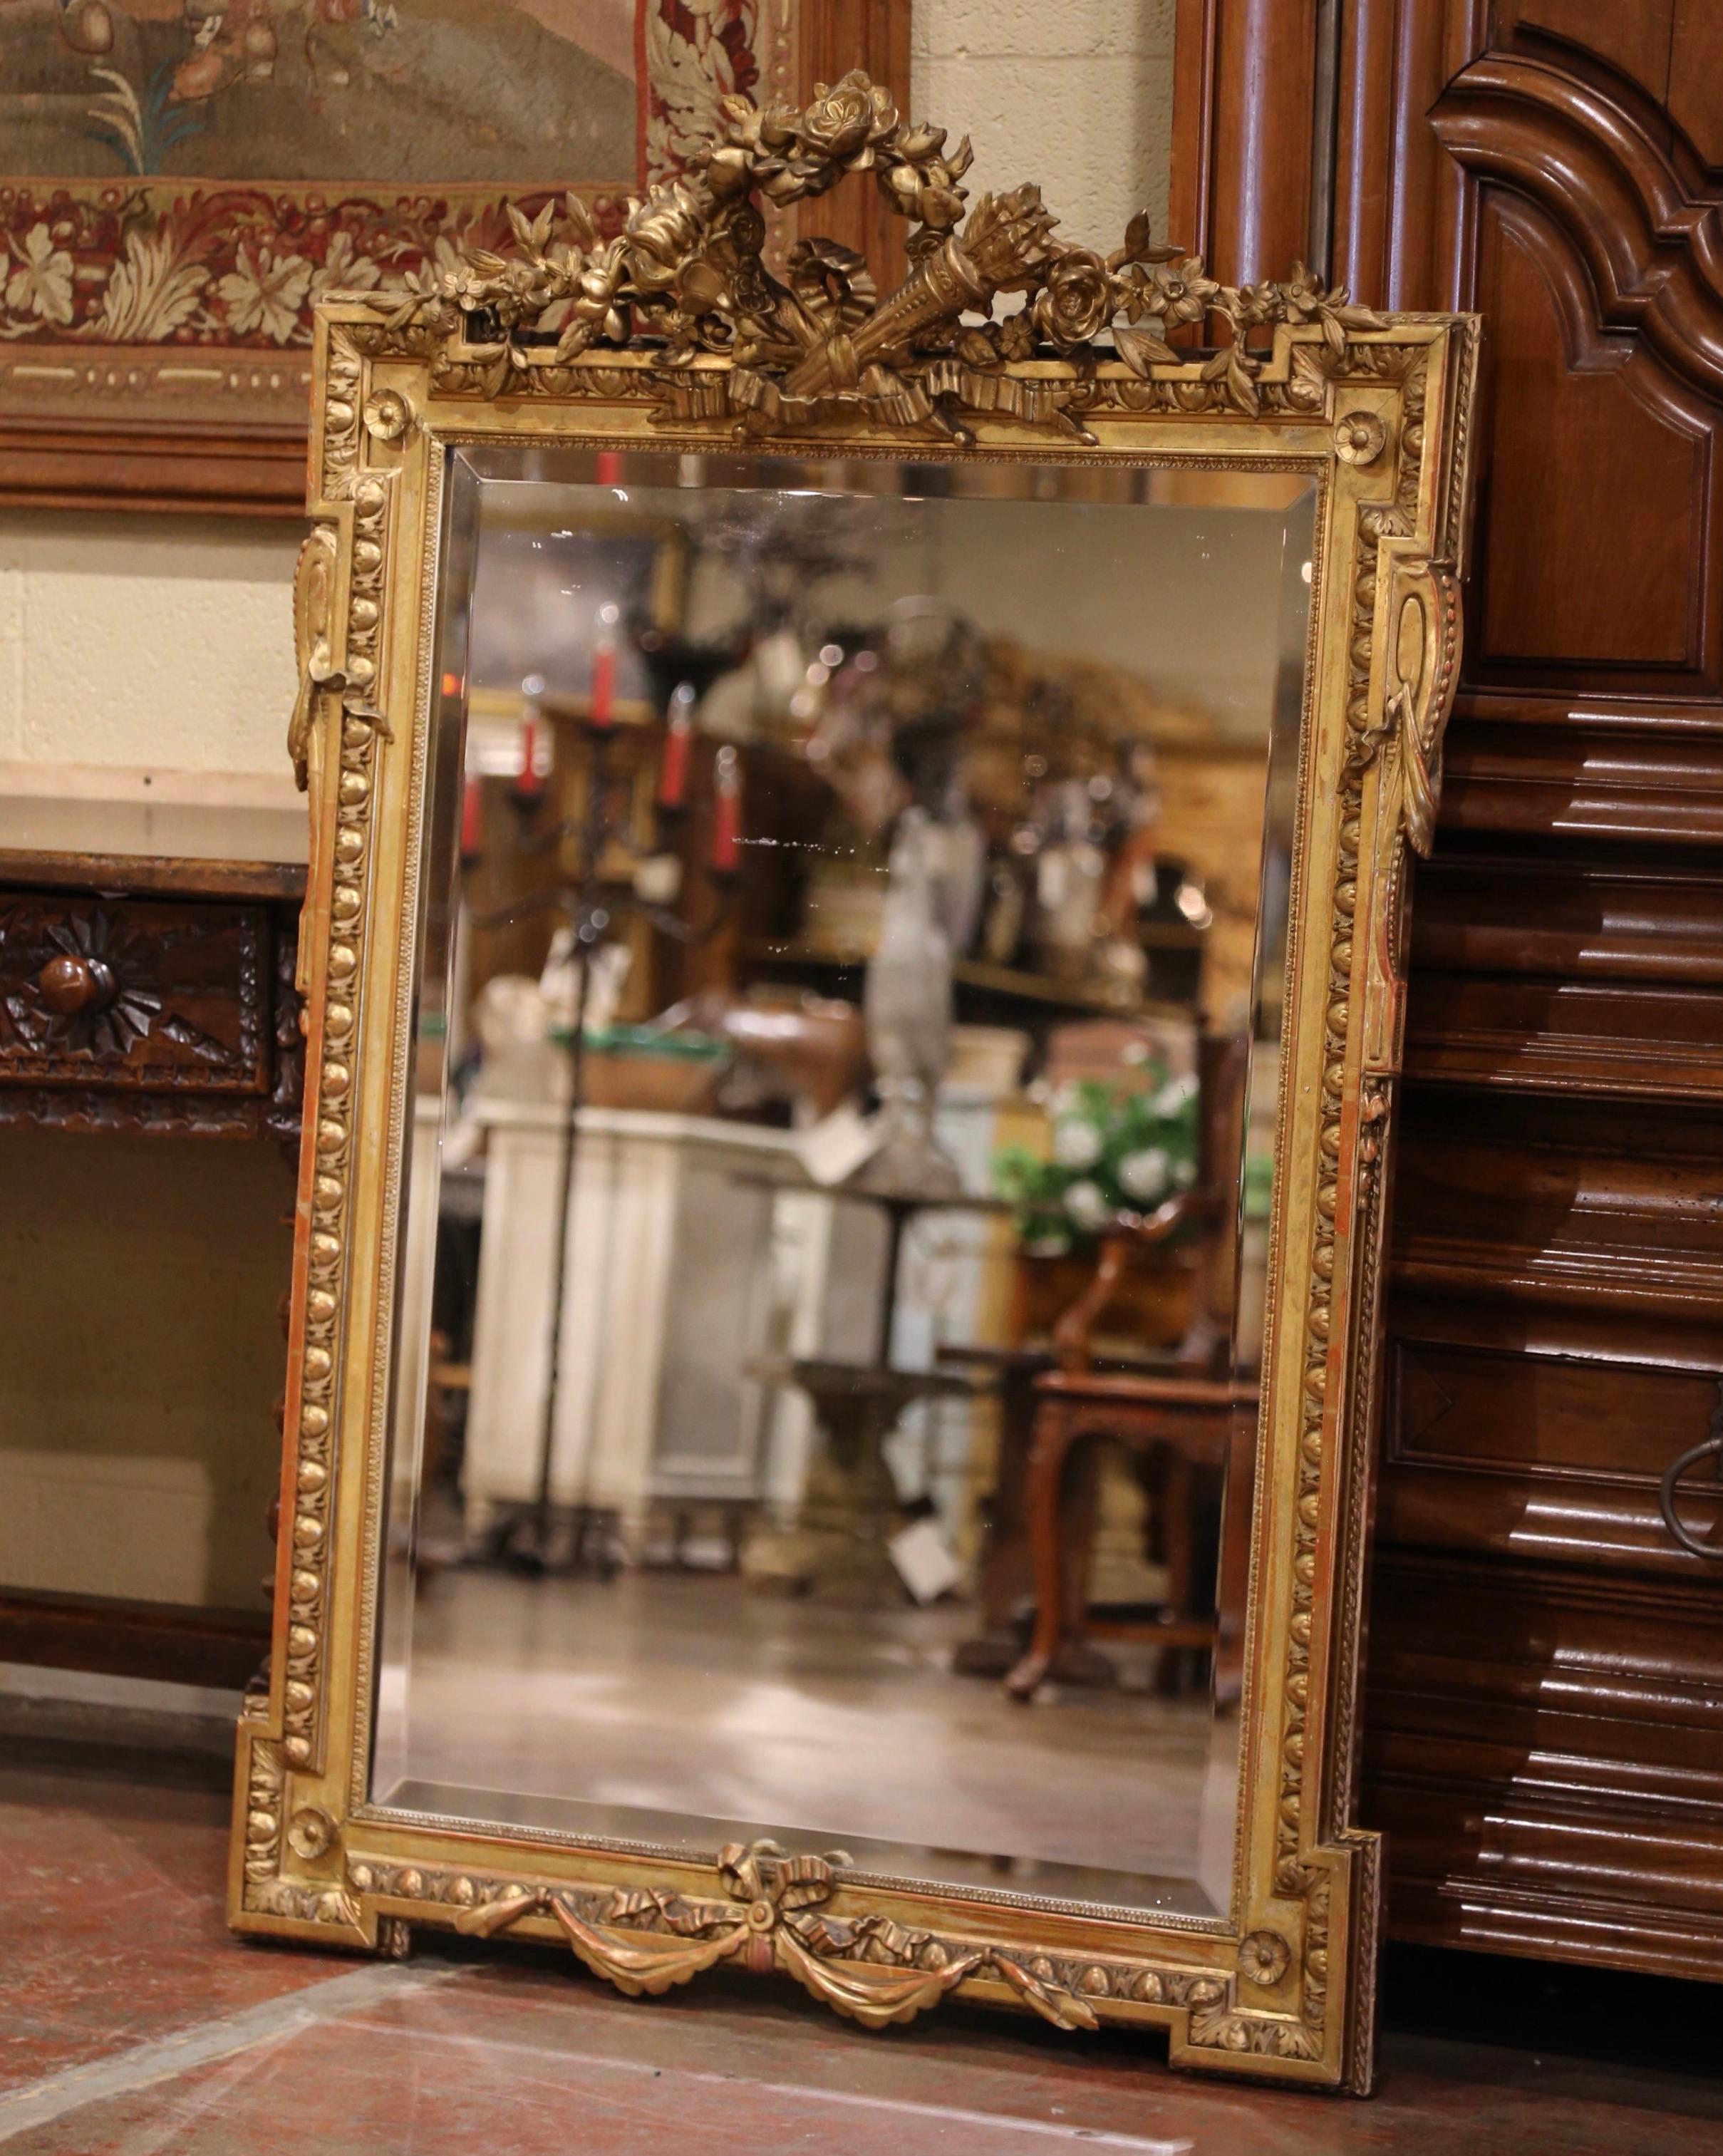 Decorate a powder room or an entry way with this elegant antique mirror! Crafted in France circa 1860, and rectangular in shape, the mirror features an intricate cartouche at the pediment embellished with crossed torches set inside a laurel crown,